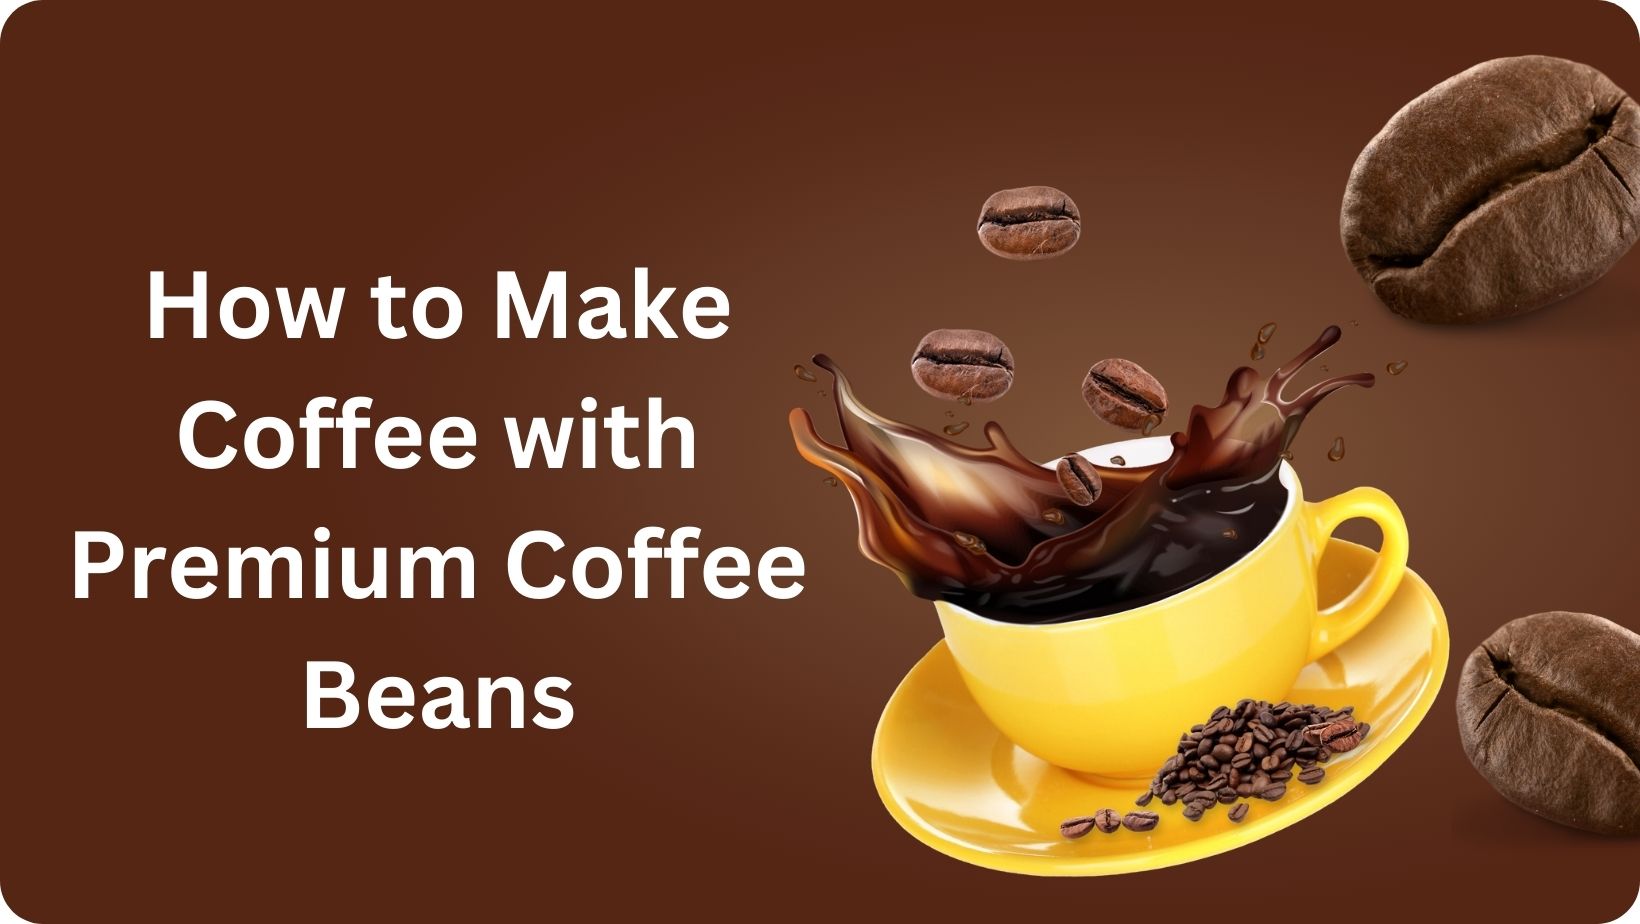 How to Make Coffee with Premium Coffee Beans